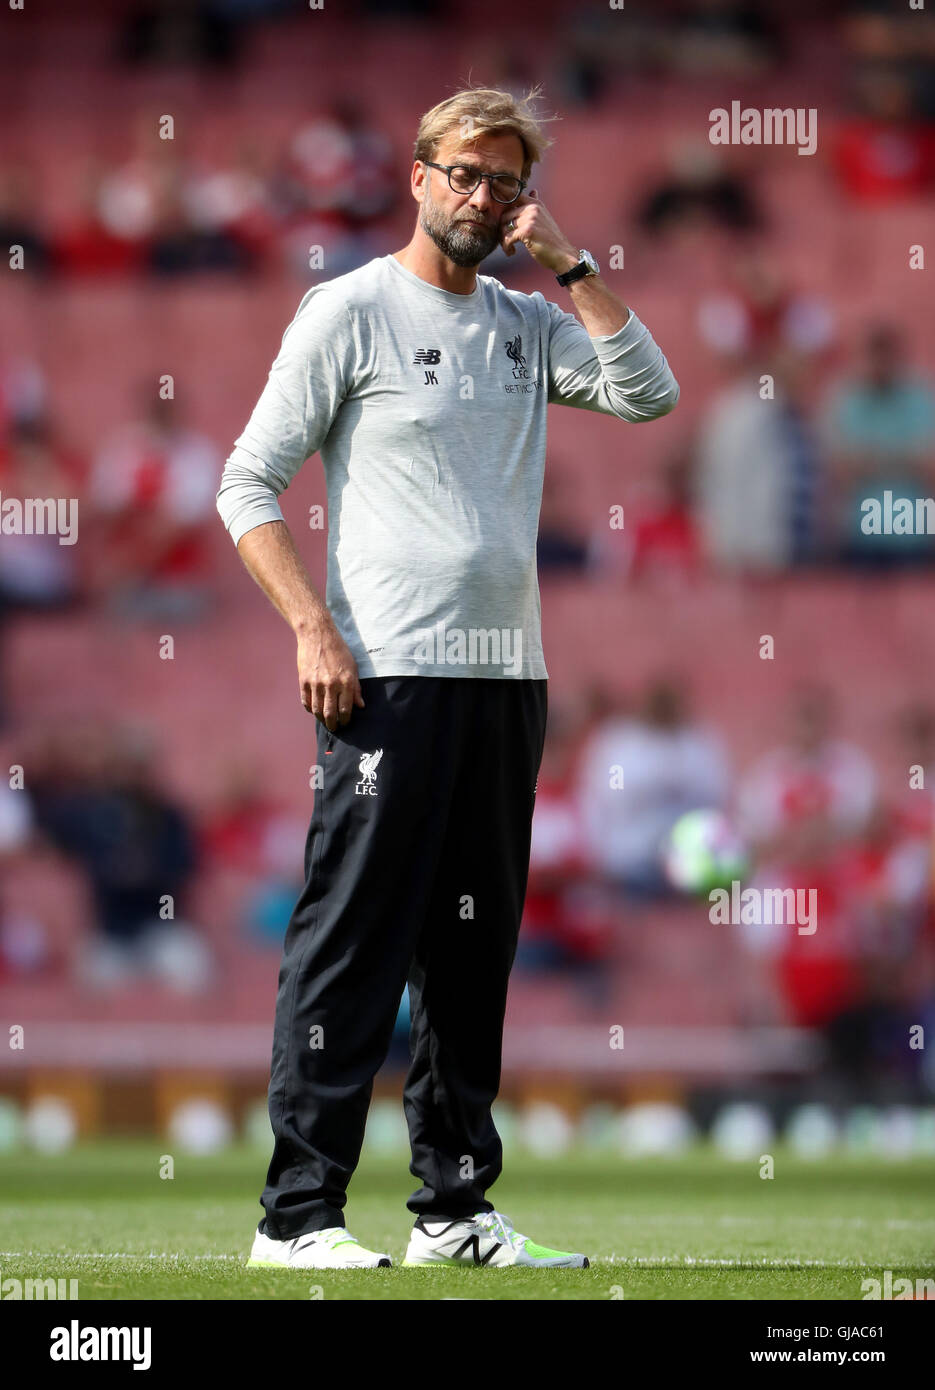 Liverpool manager Jurgen Klopp before the Premier League match at the Emirates Stadium, London. PRESS ASSOCIATION Photo. Picture date: Sunday August 14, 2016. See PA story SOCCER Arsenal. Photo credit should read: Nick Potts/PA Wire. RESTRICTIONS: No use with unauthorised audio, video, data, fixture lists, club/league logos or 'live' services. Online in-match use limited to 75 images, no video emulation. No use in betting, games or single club/league/player publications. Stock Photo